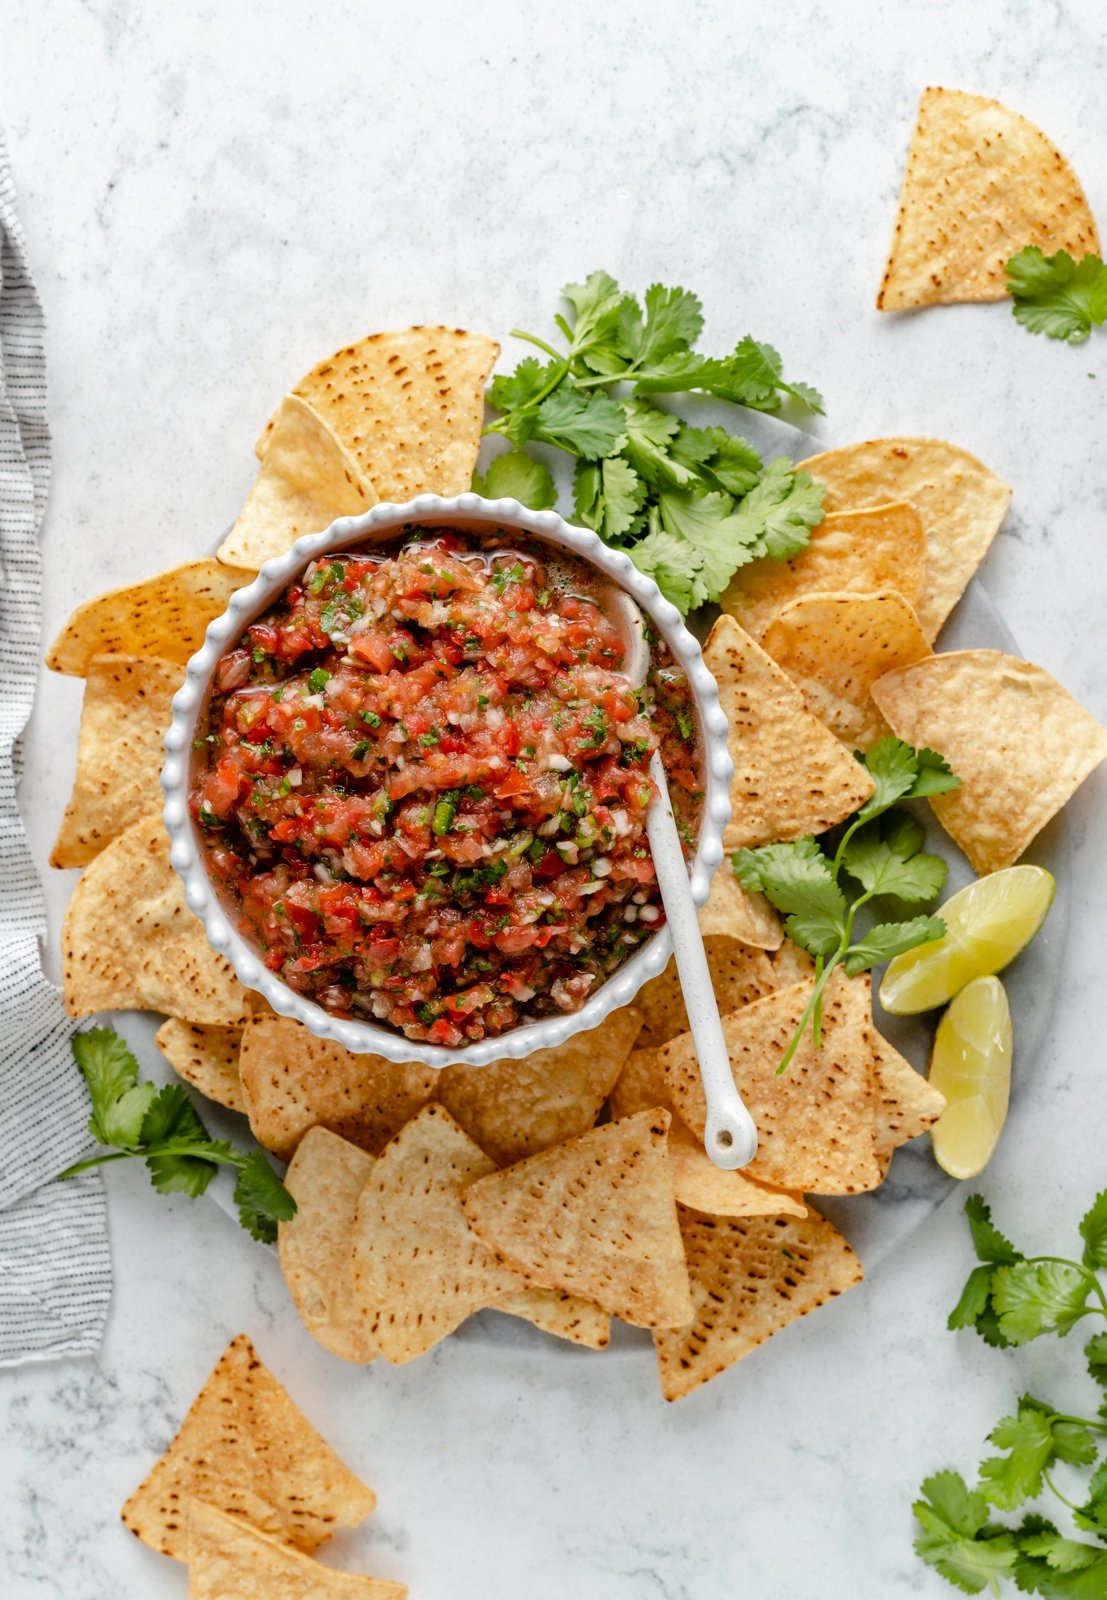 tomato salsa in a bowl surrounded by tortilla chips